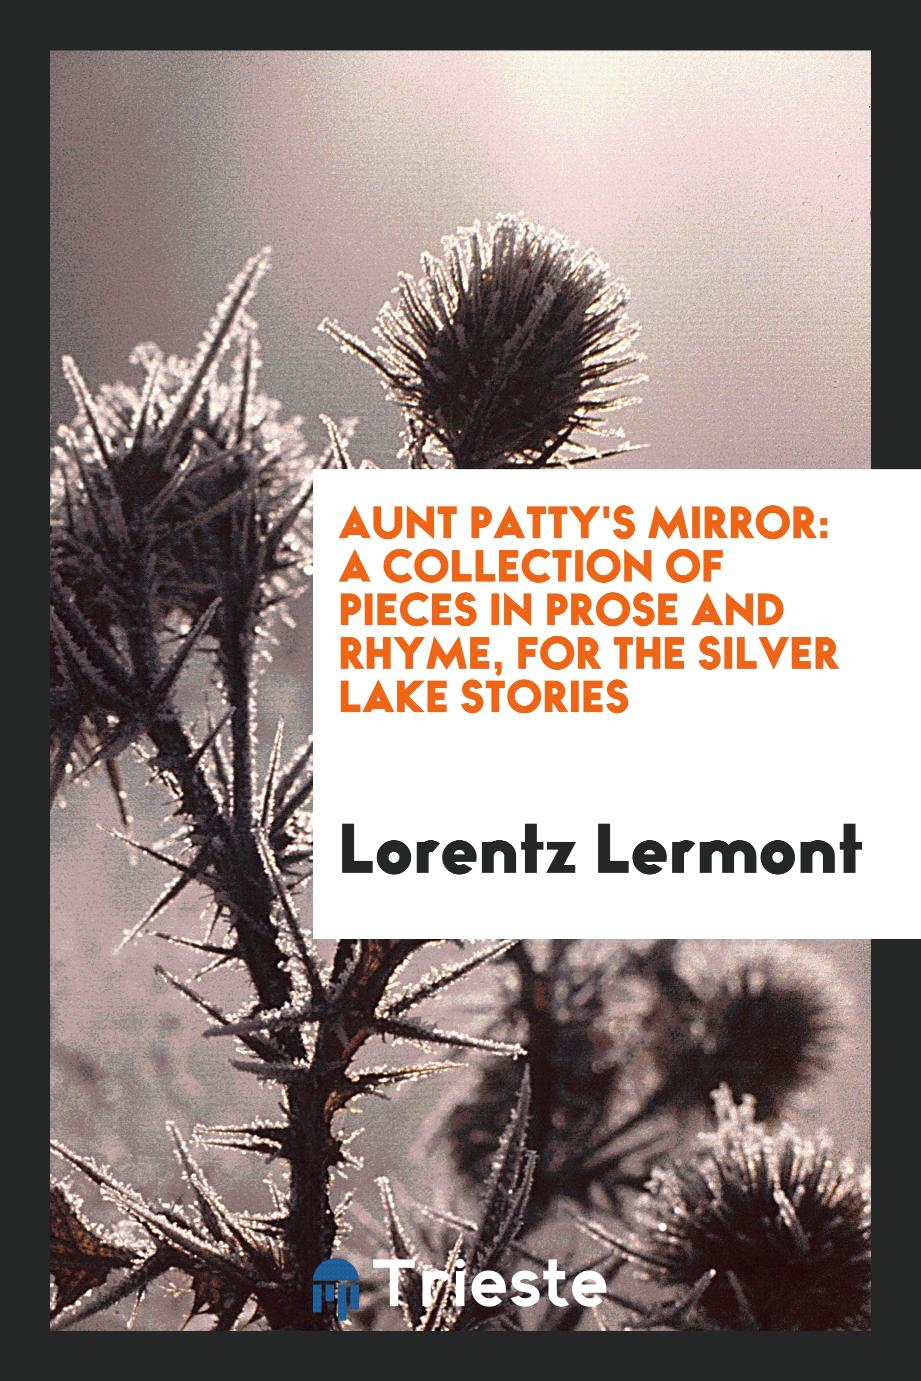 Aunt Patty's Mirror: A Collection of Pieces in Prose and Rhyme, for the Silver Lake Stories